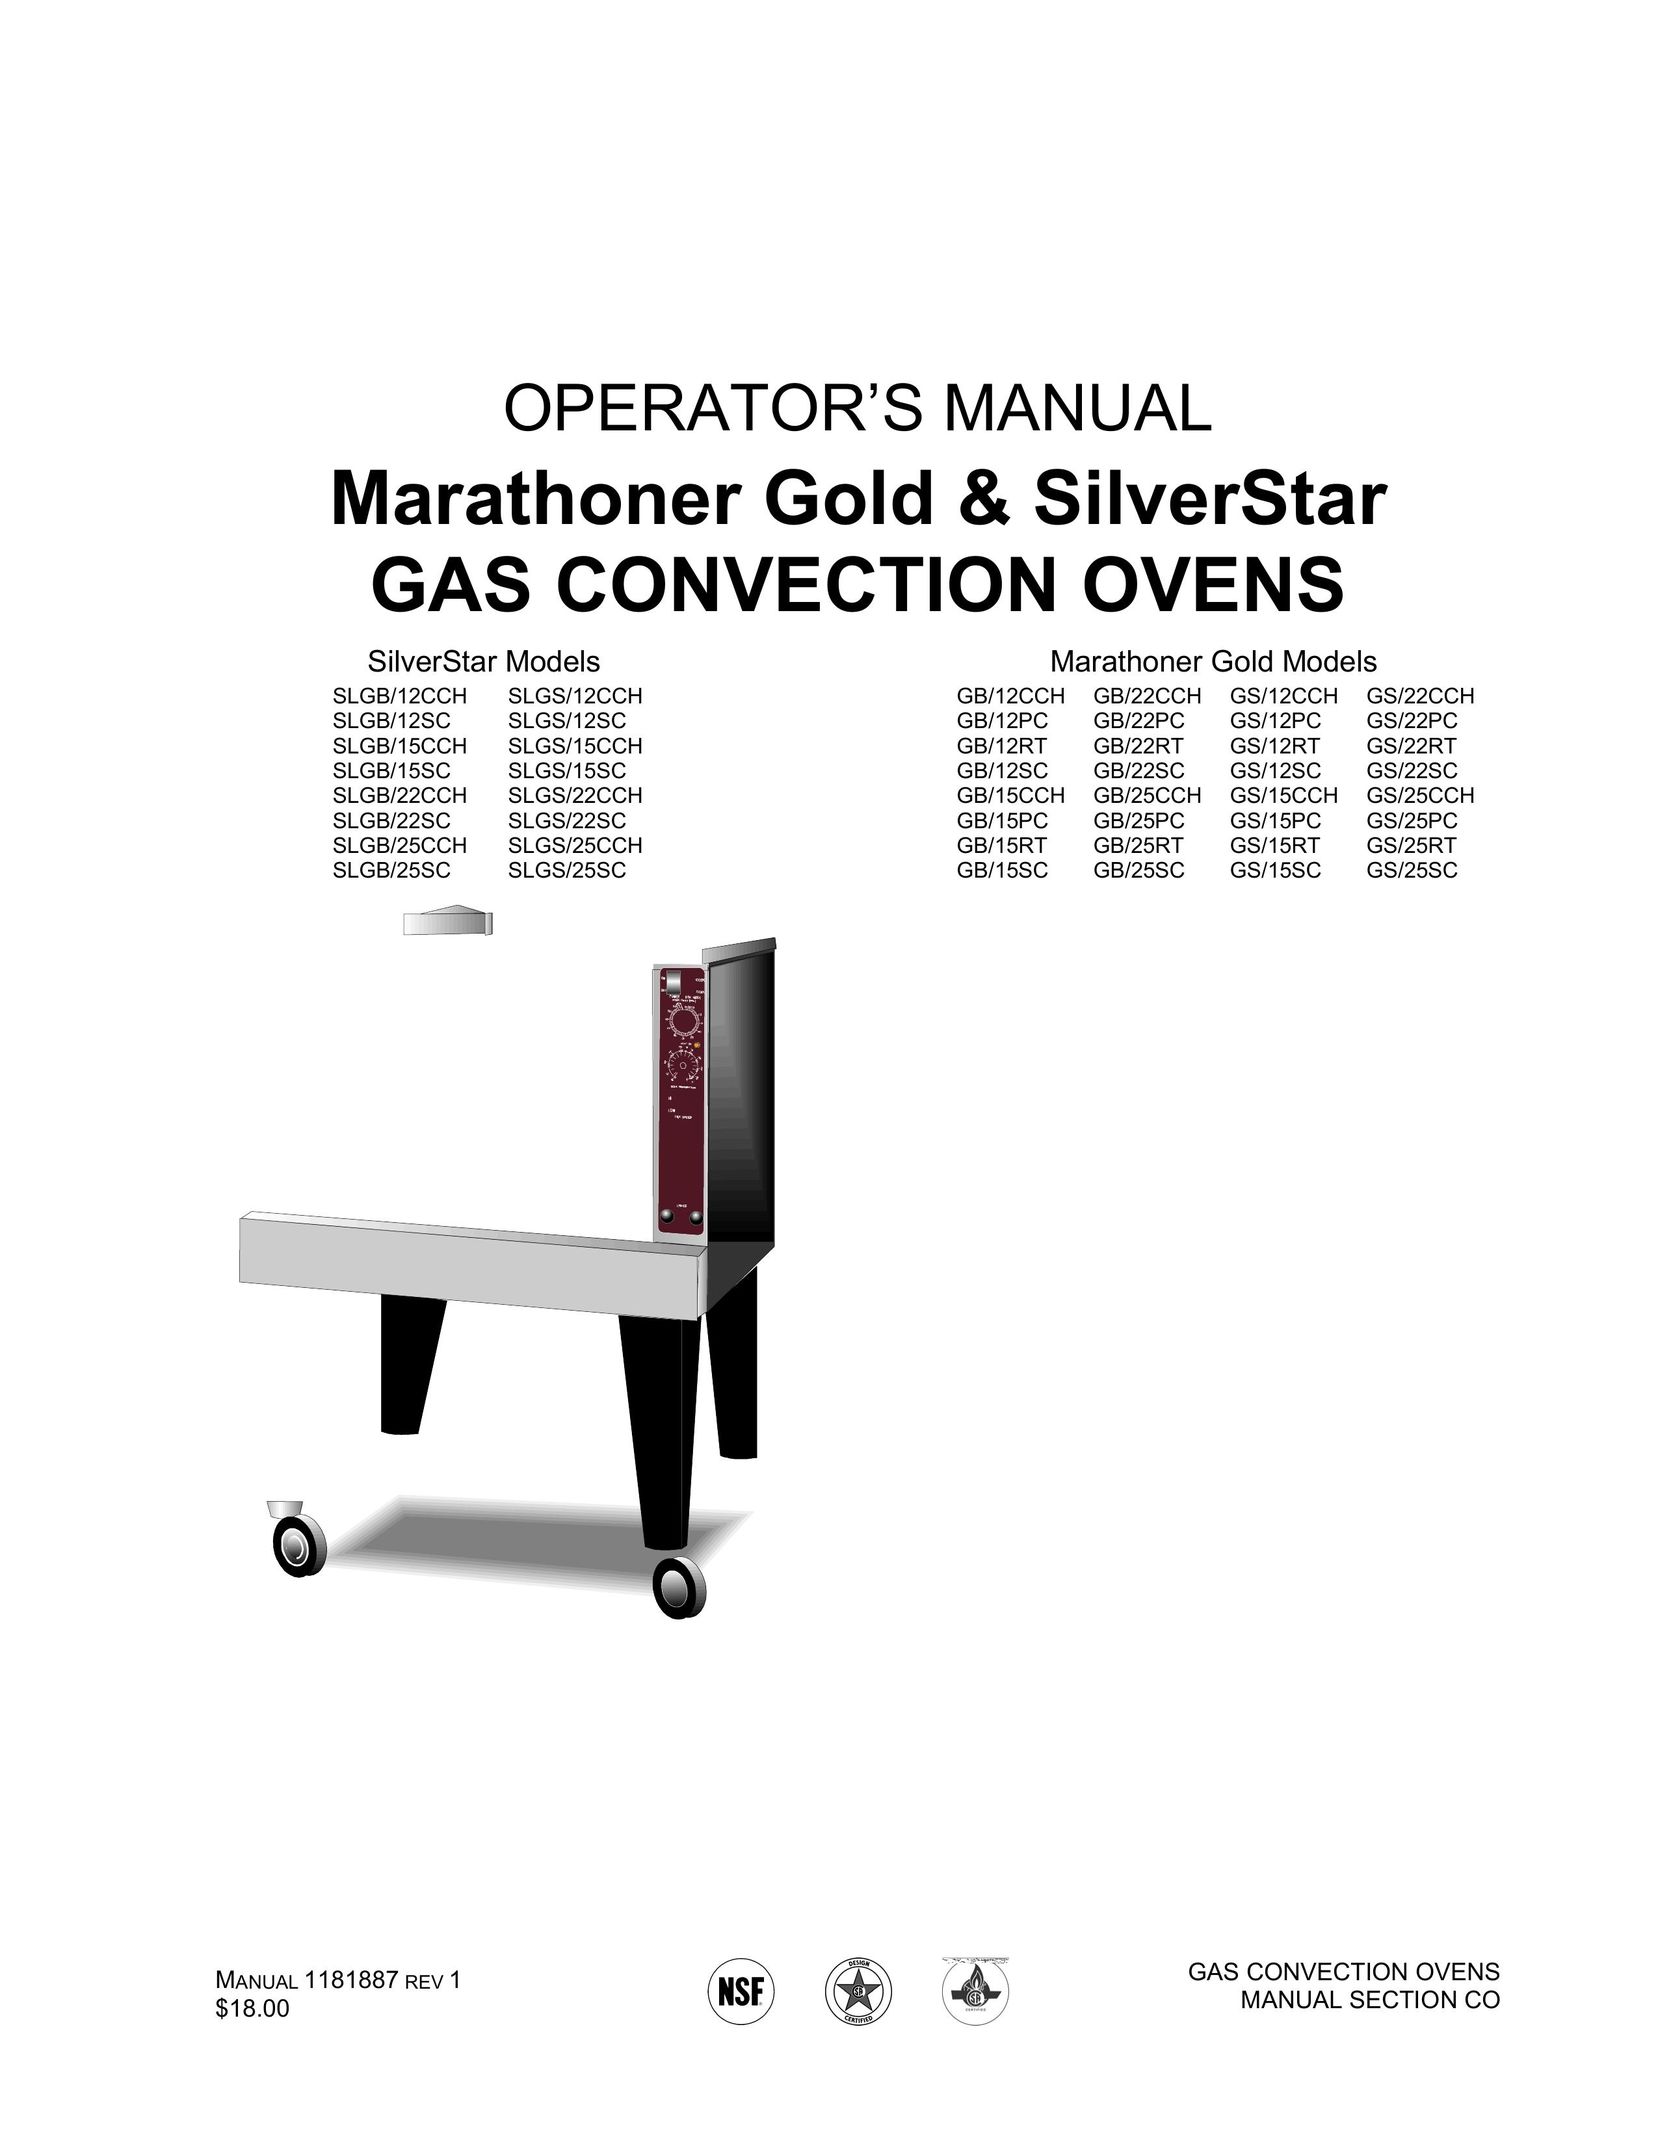 Southbend GB/12RT Oven User Manual